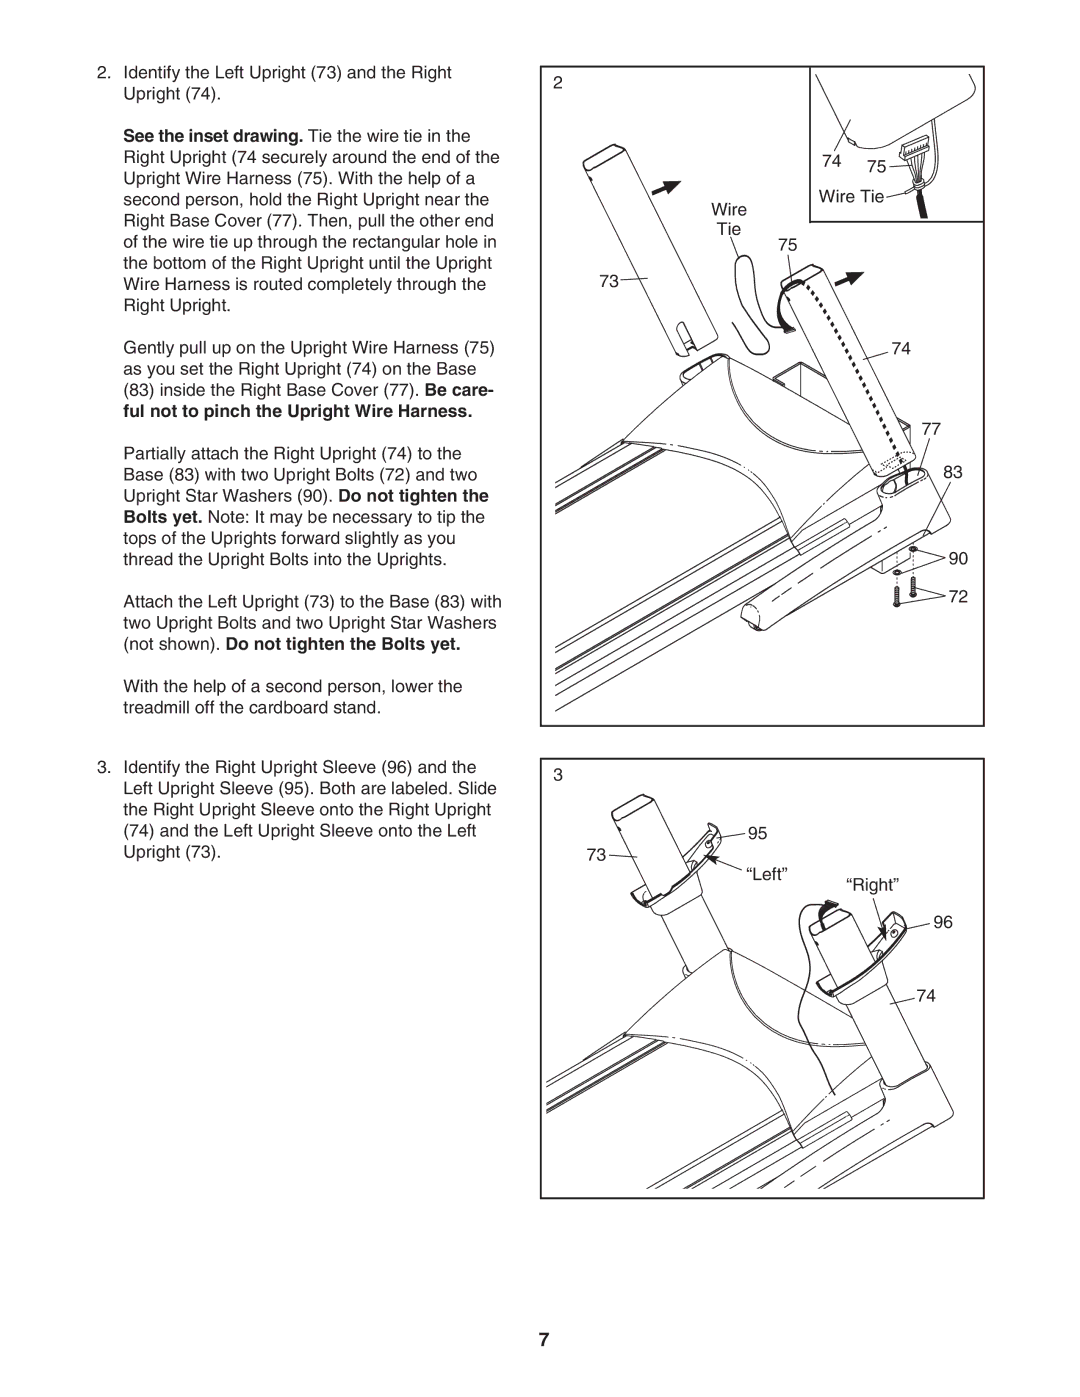 NordicTrack NTL15007.0 user manual See the inset drawing. Tie the wire tie, Ful not to pinch the Upright Wire Harness 